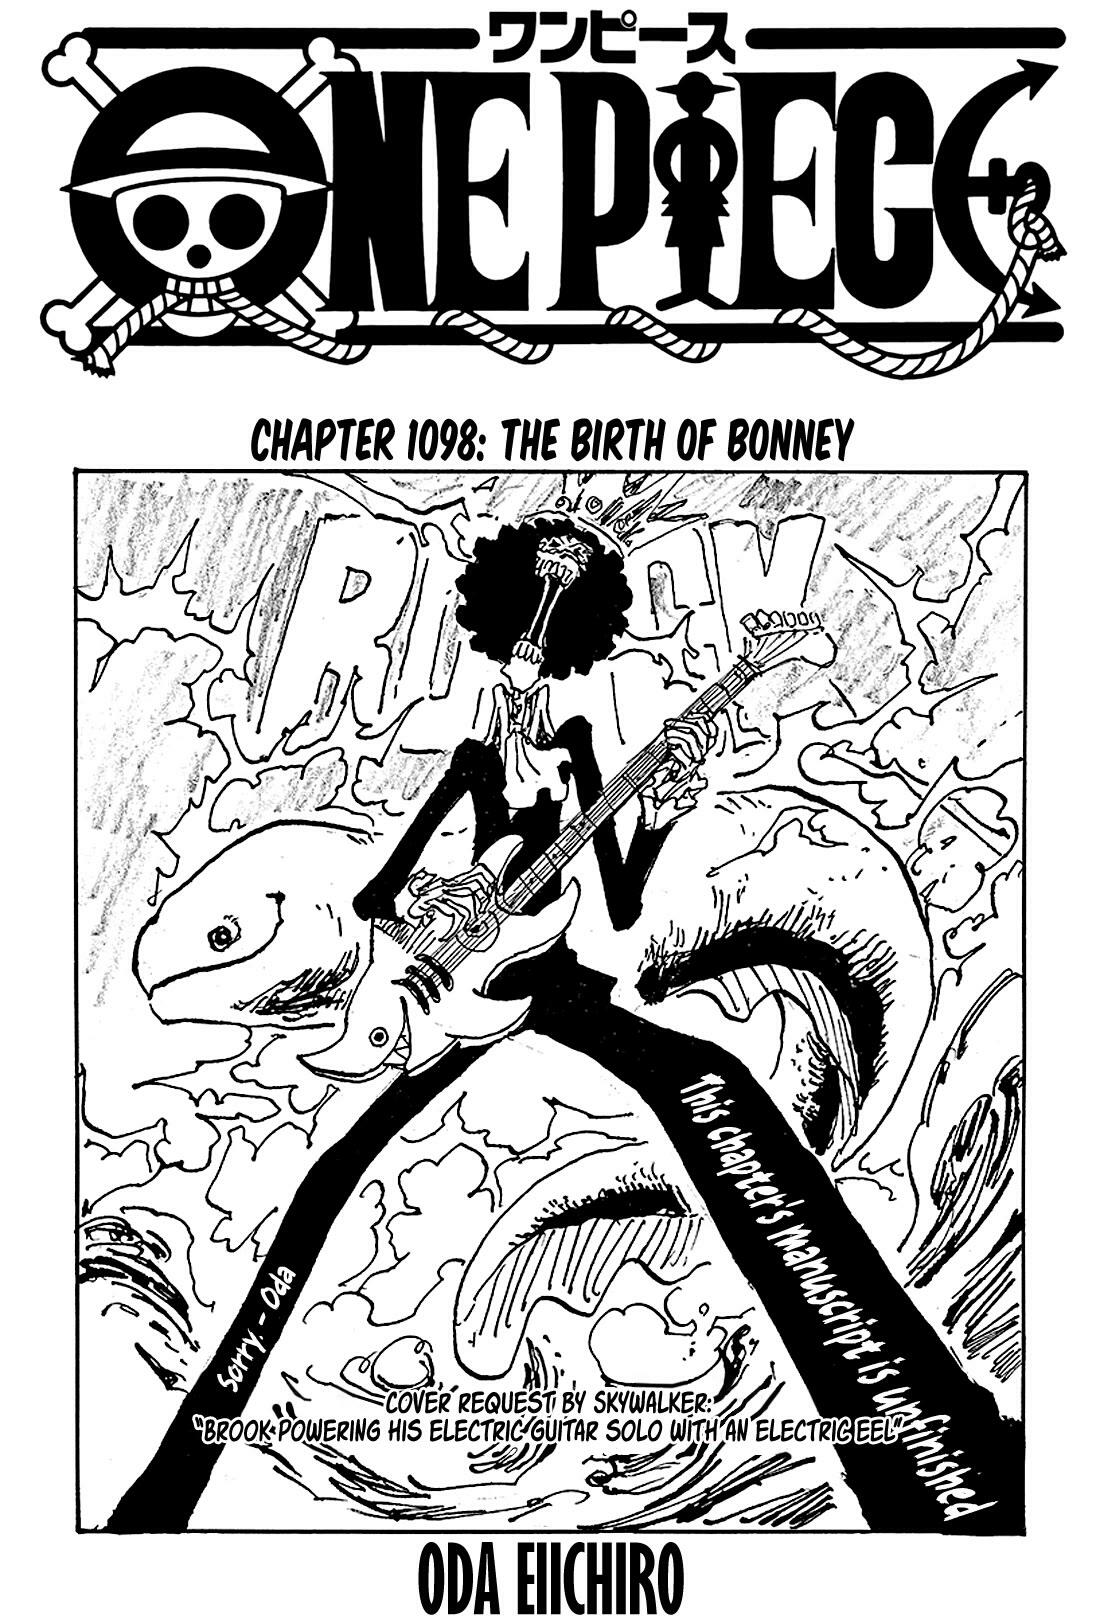 Read One Piece Chapter 651 : The Voice From The New World on Mangakakalot